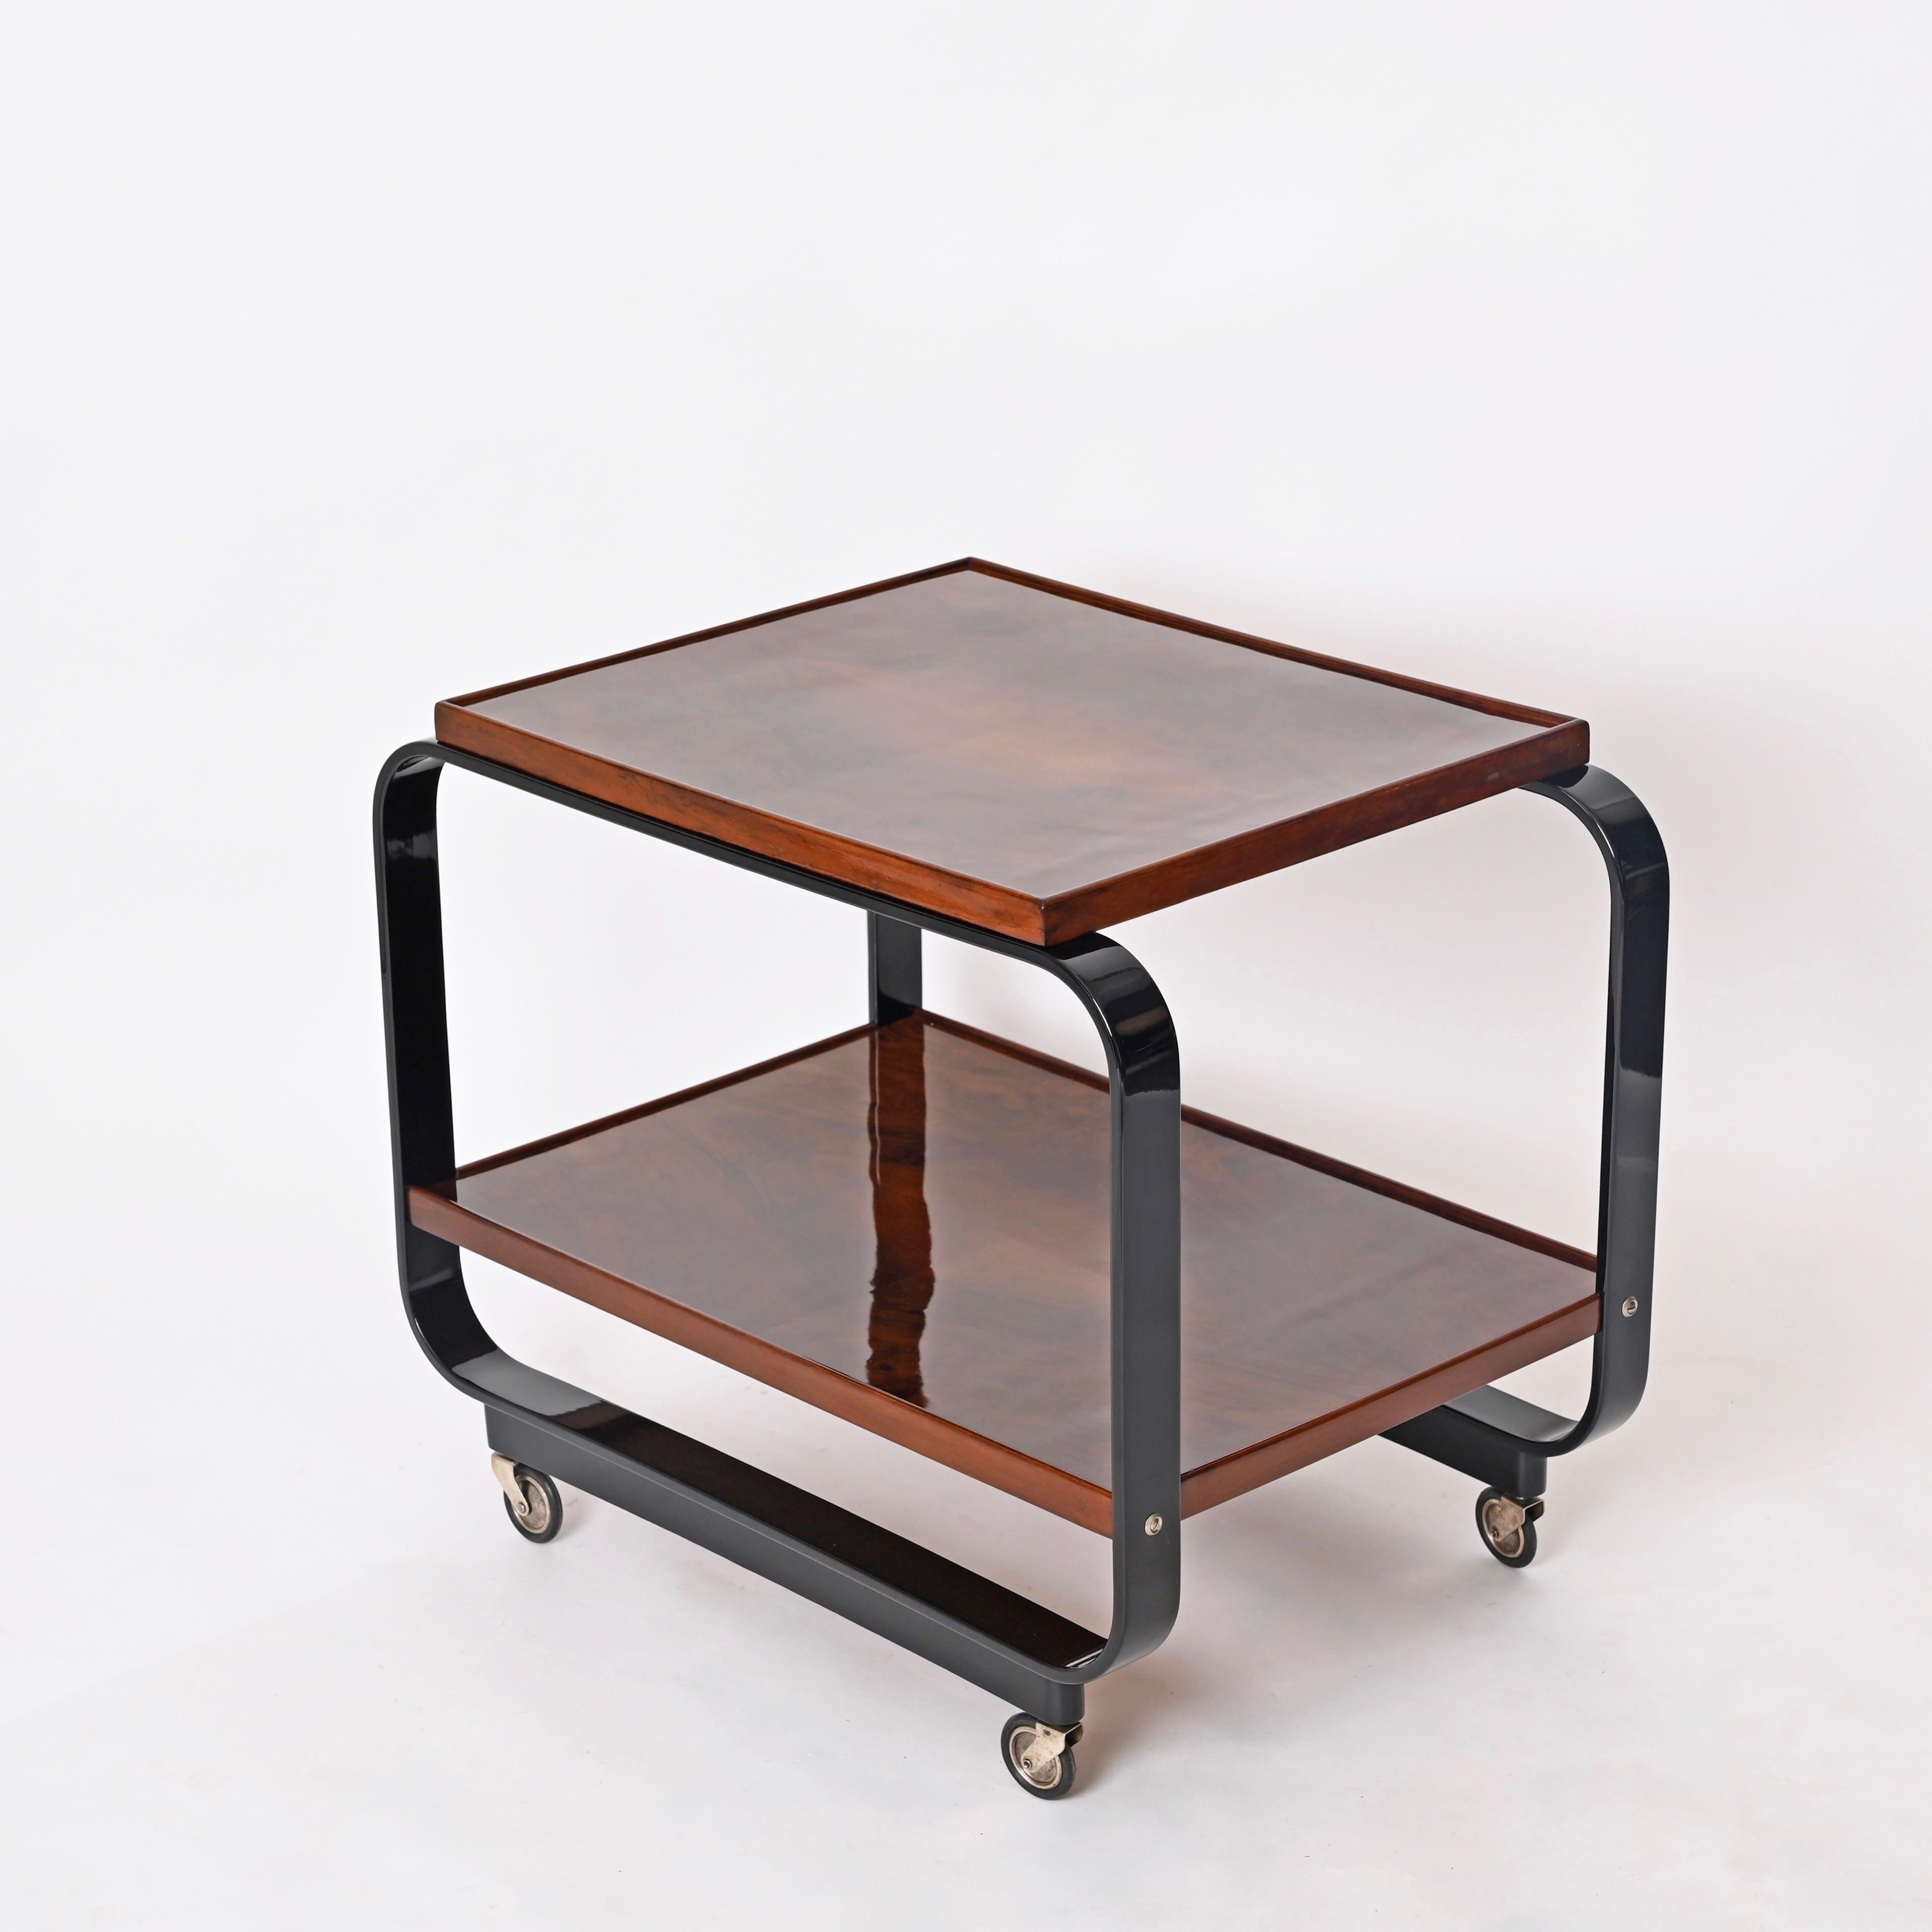 Serving Bar Cart by Gino Maggioni Signed, Bent Curly Walnut Wood, Italy, 1930s For Sale 5